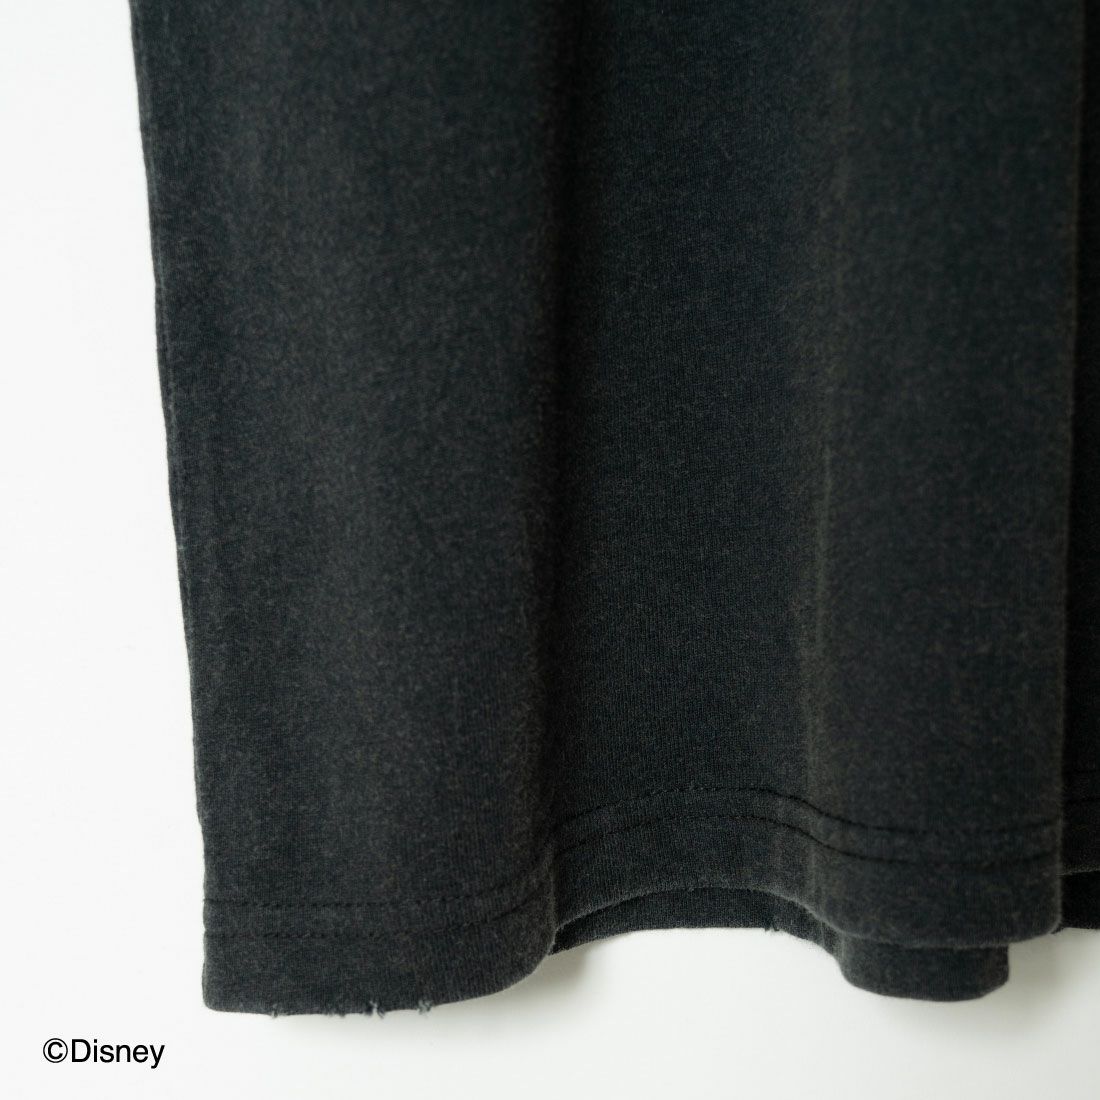 Jeans Factory Clothes [ジーンズファクトリークローズ] MICKEY MOUSE/ダメージ加工フロッキープリントTシャツ [JFC-242-037] BLACK